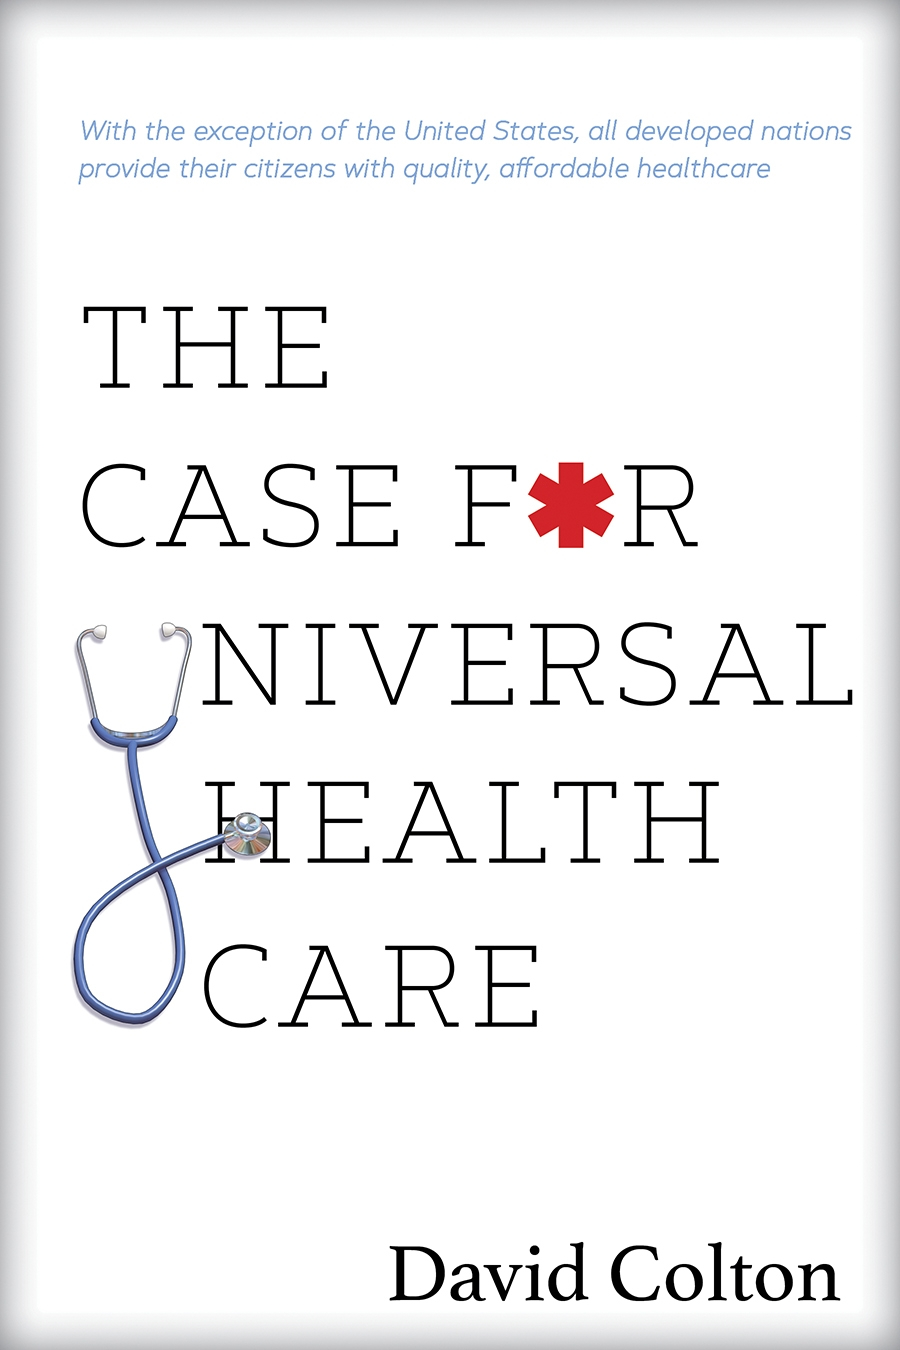 literature review on universal healthcare